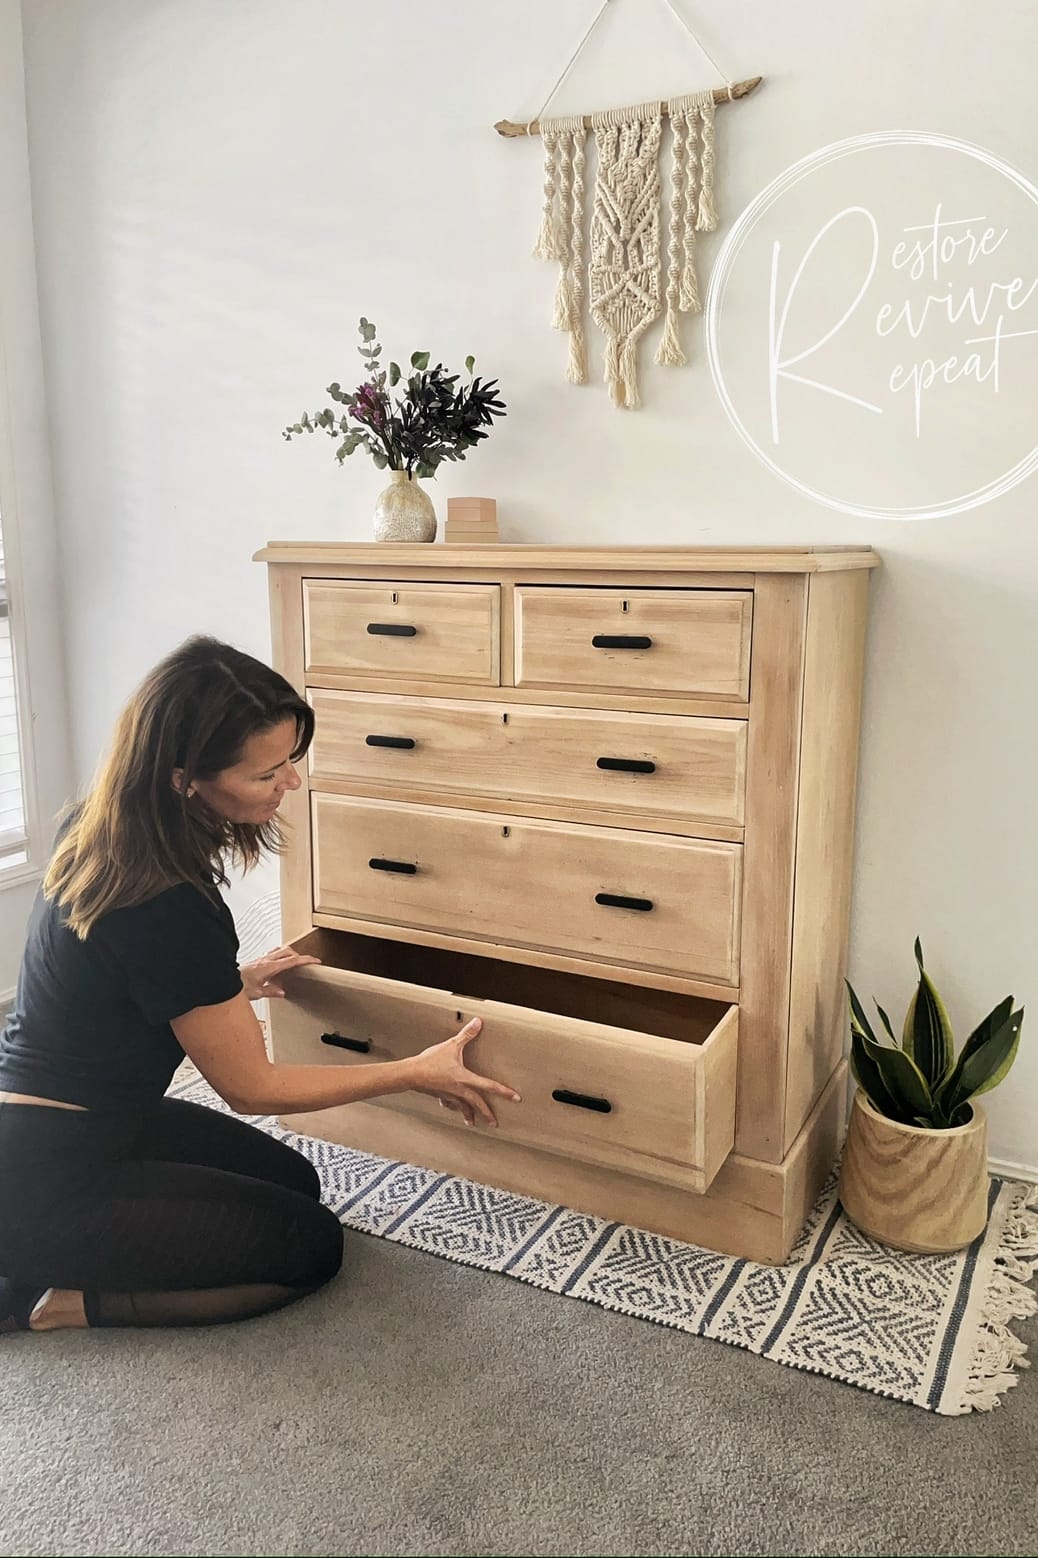 How I restored this beautiful vintage chest of drawers.